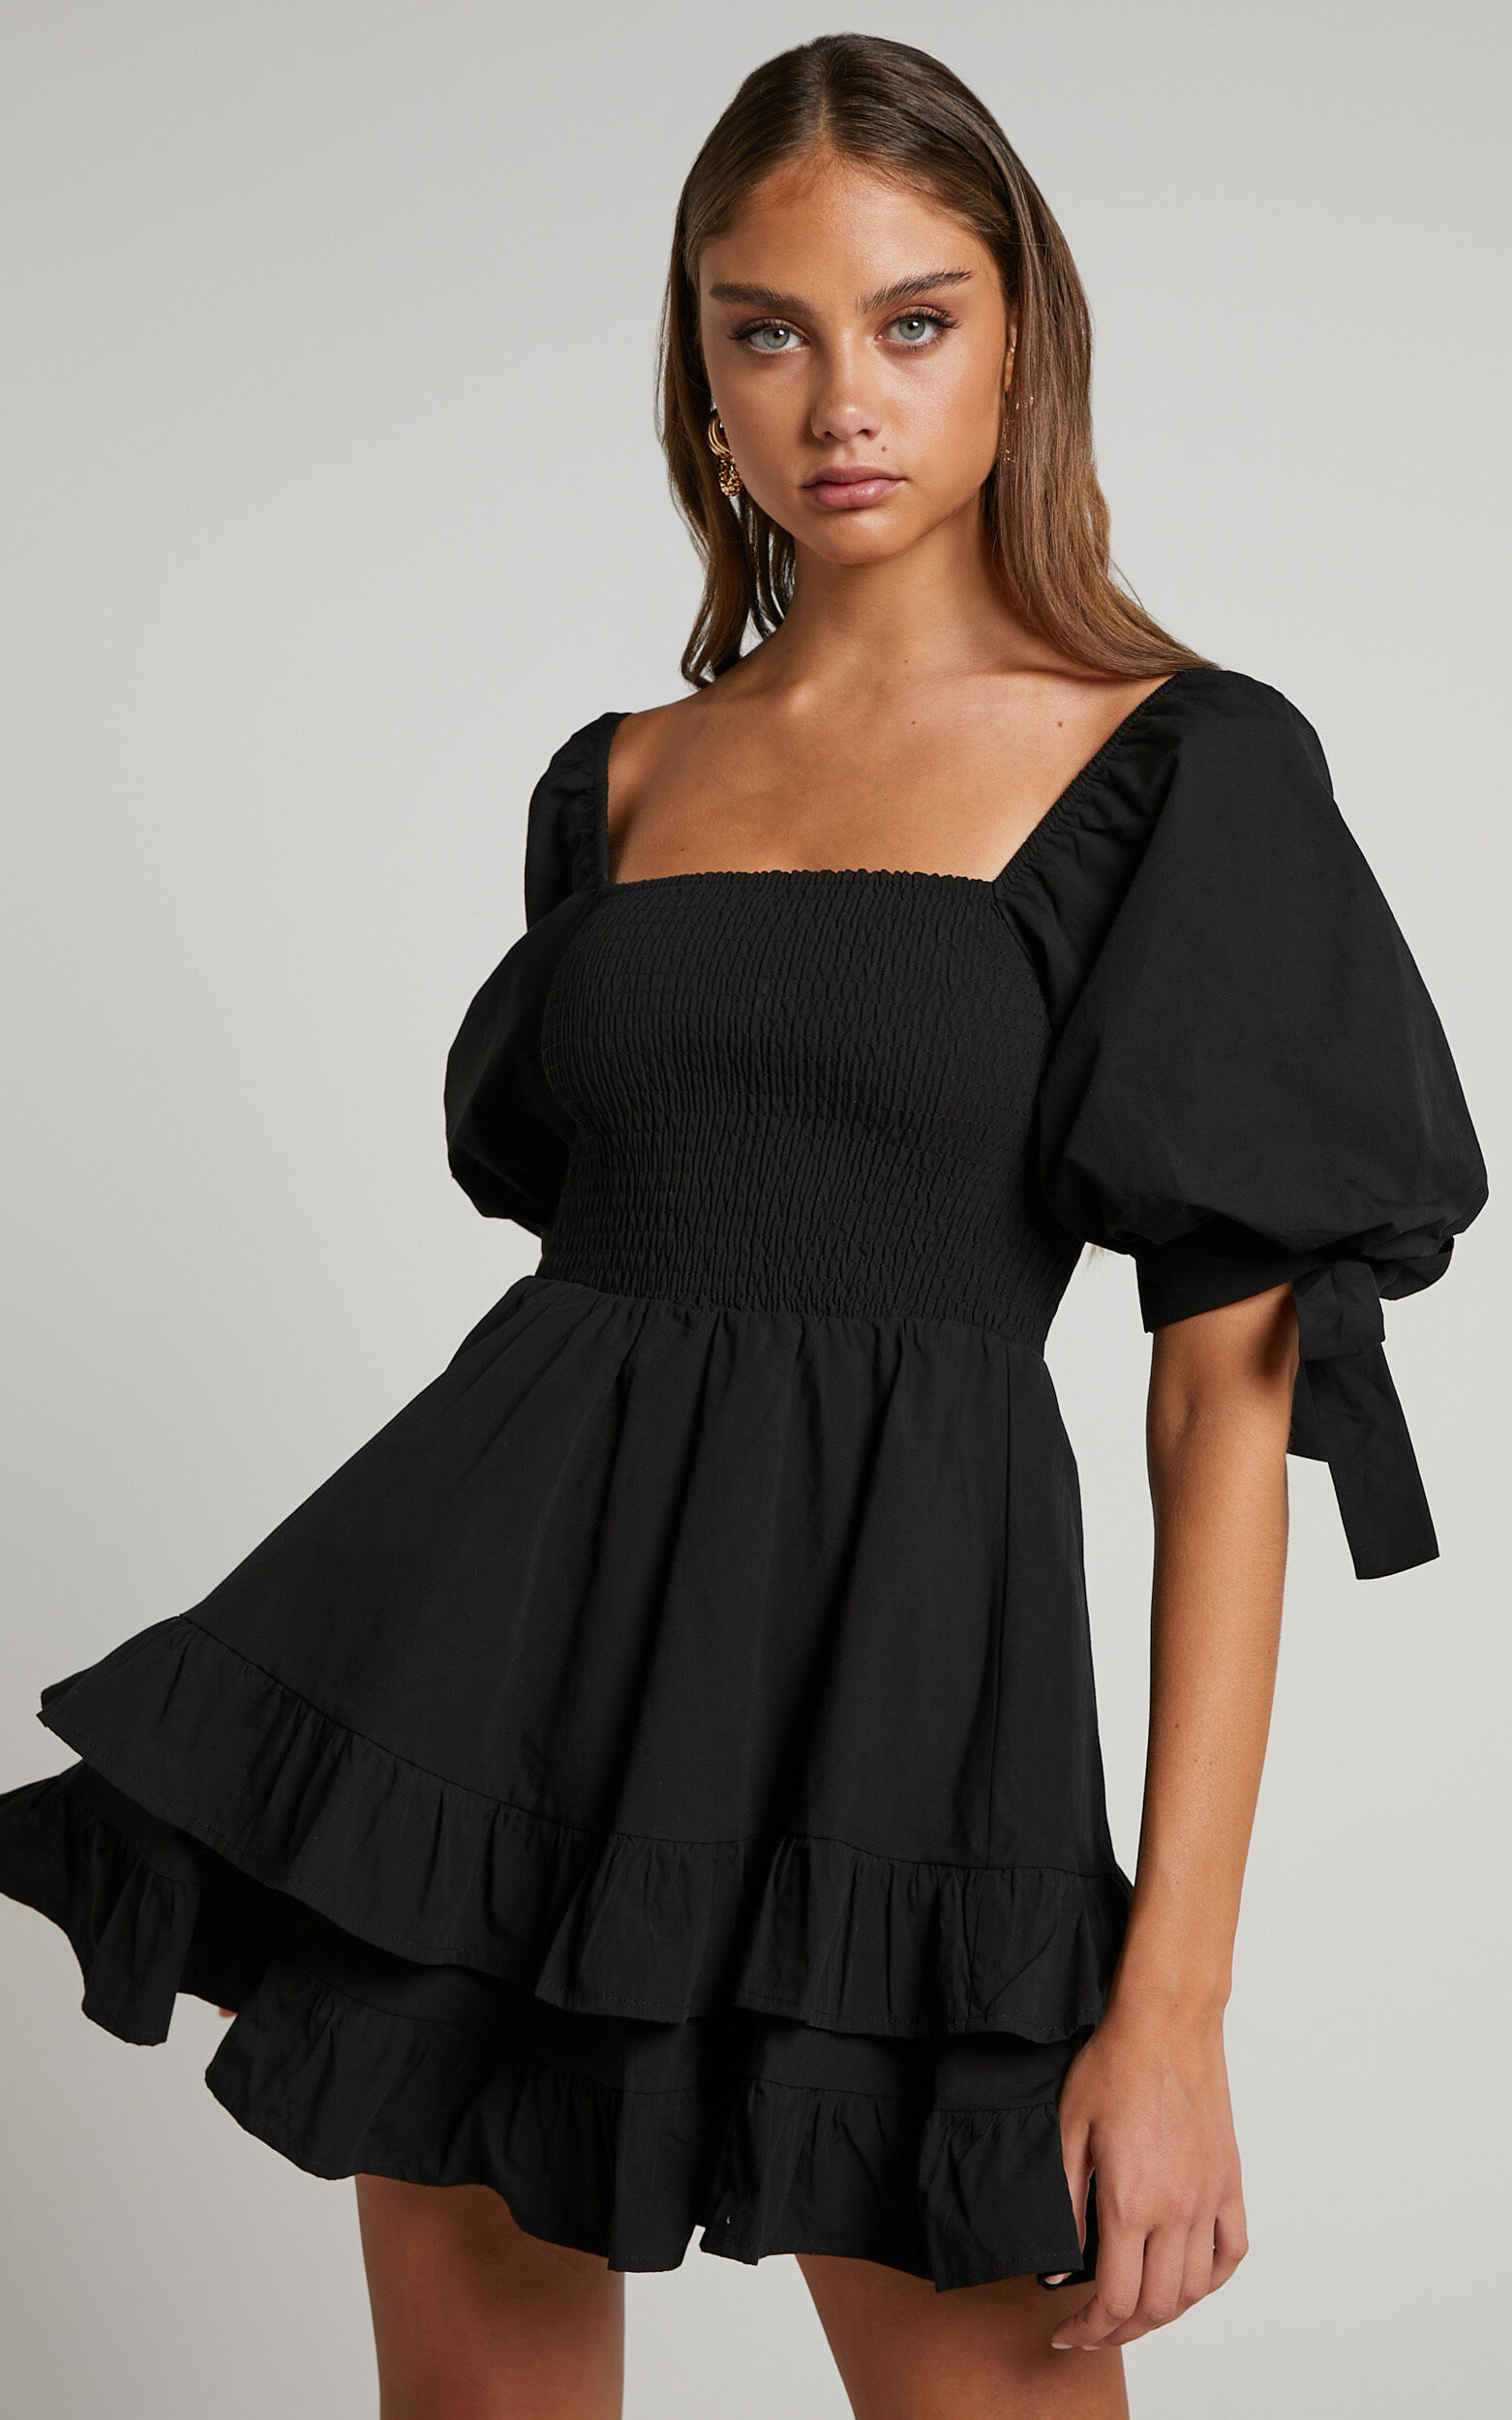 black dress with short sleeves